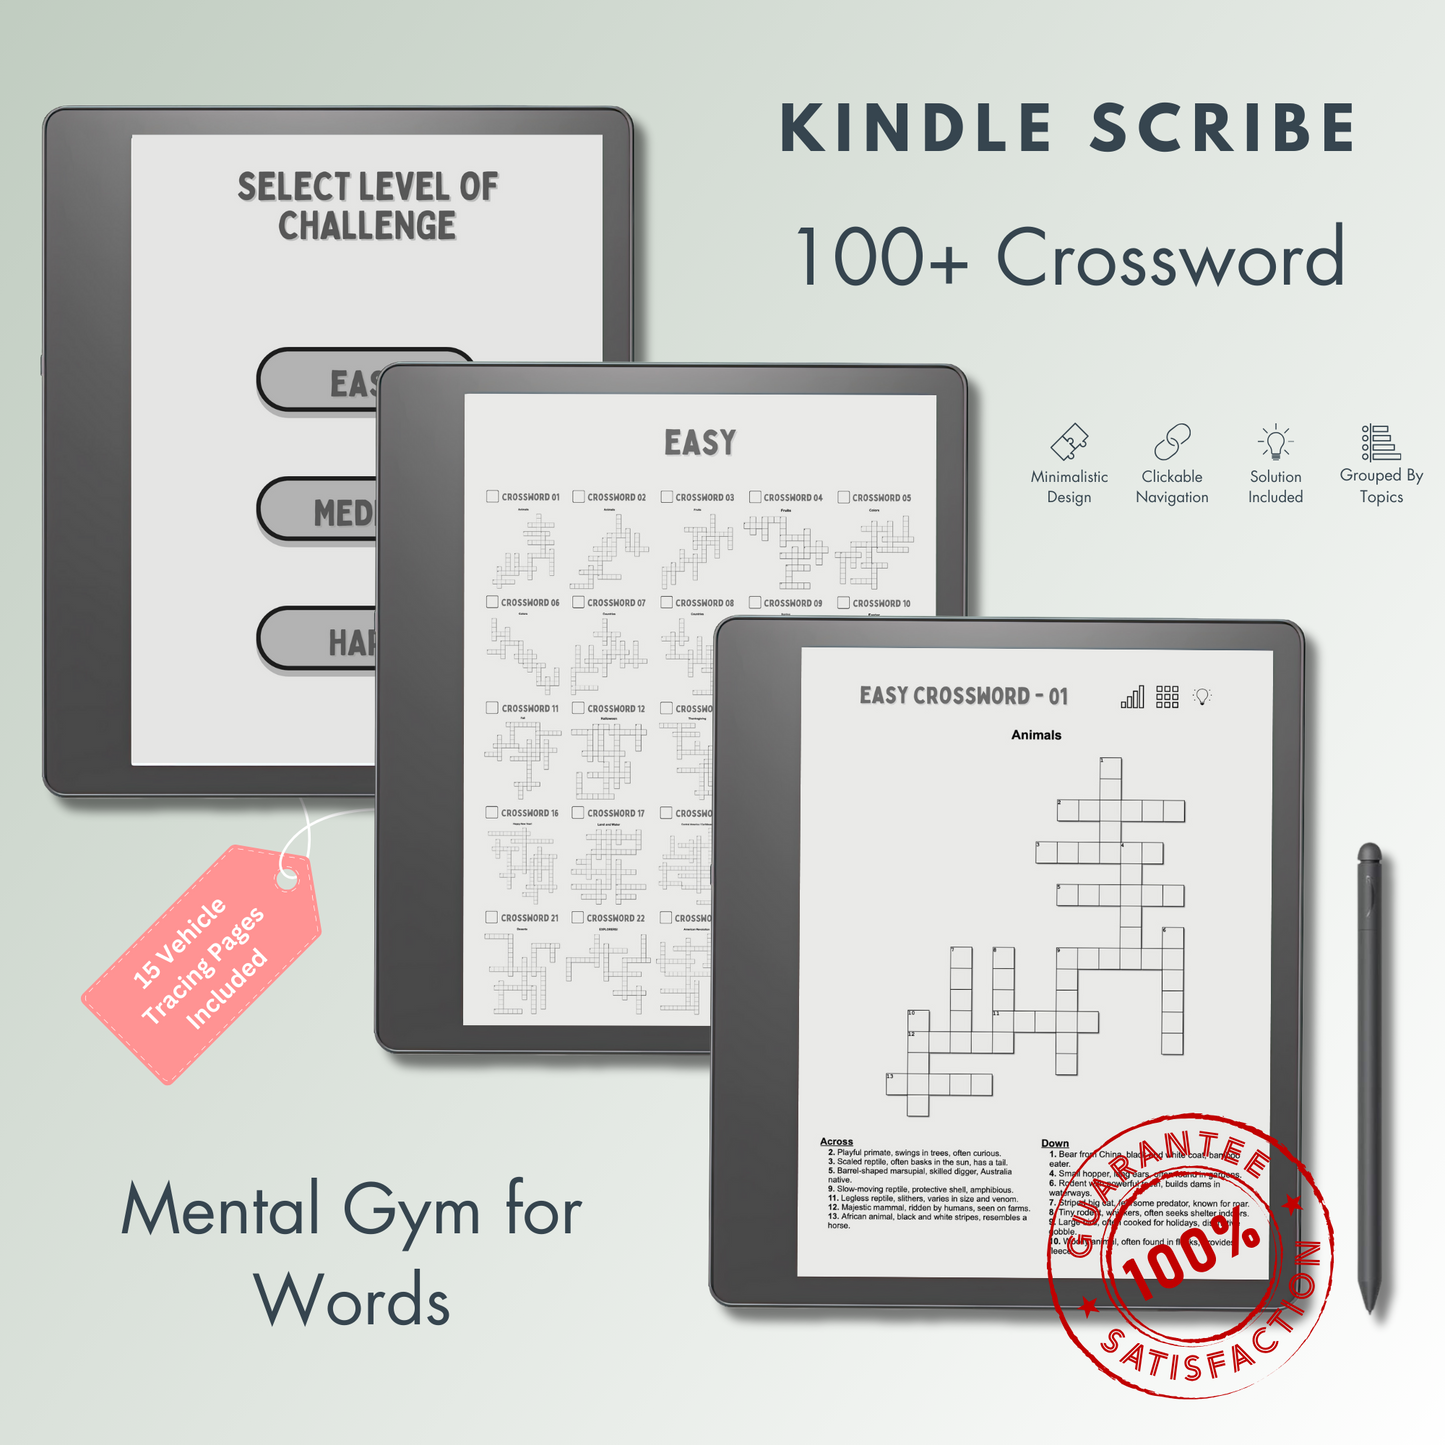 This is a Digital Download of 100+ Crossword Puzzles in 3 different levels tailored for Kindle Scribe.